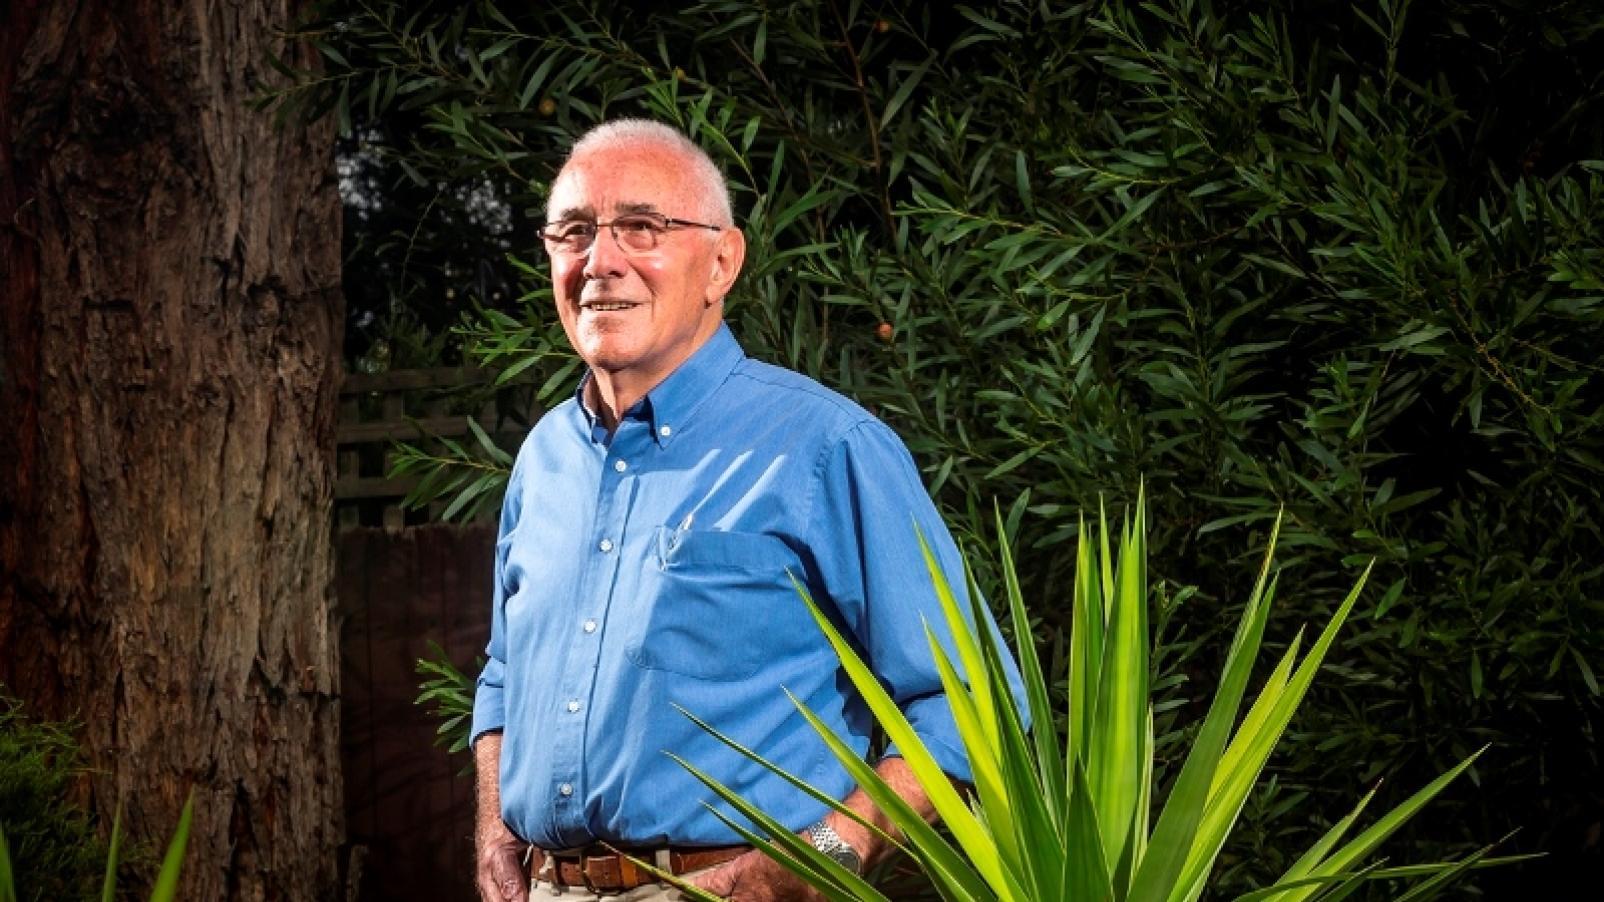 A man wearing a blue shirt standing in his garden with hands in pockets and smiling